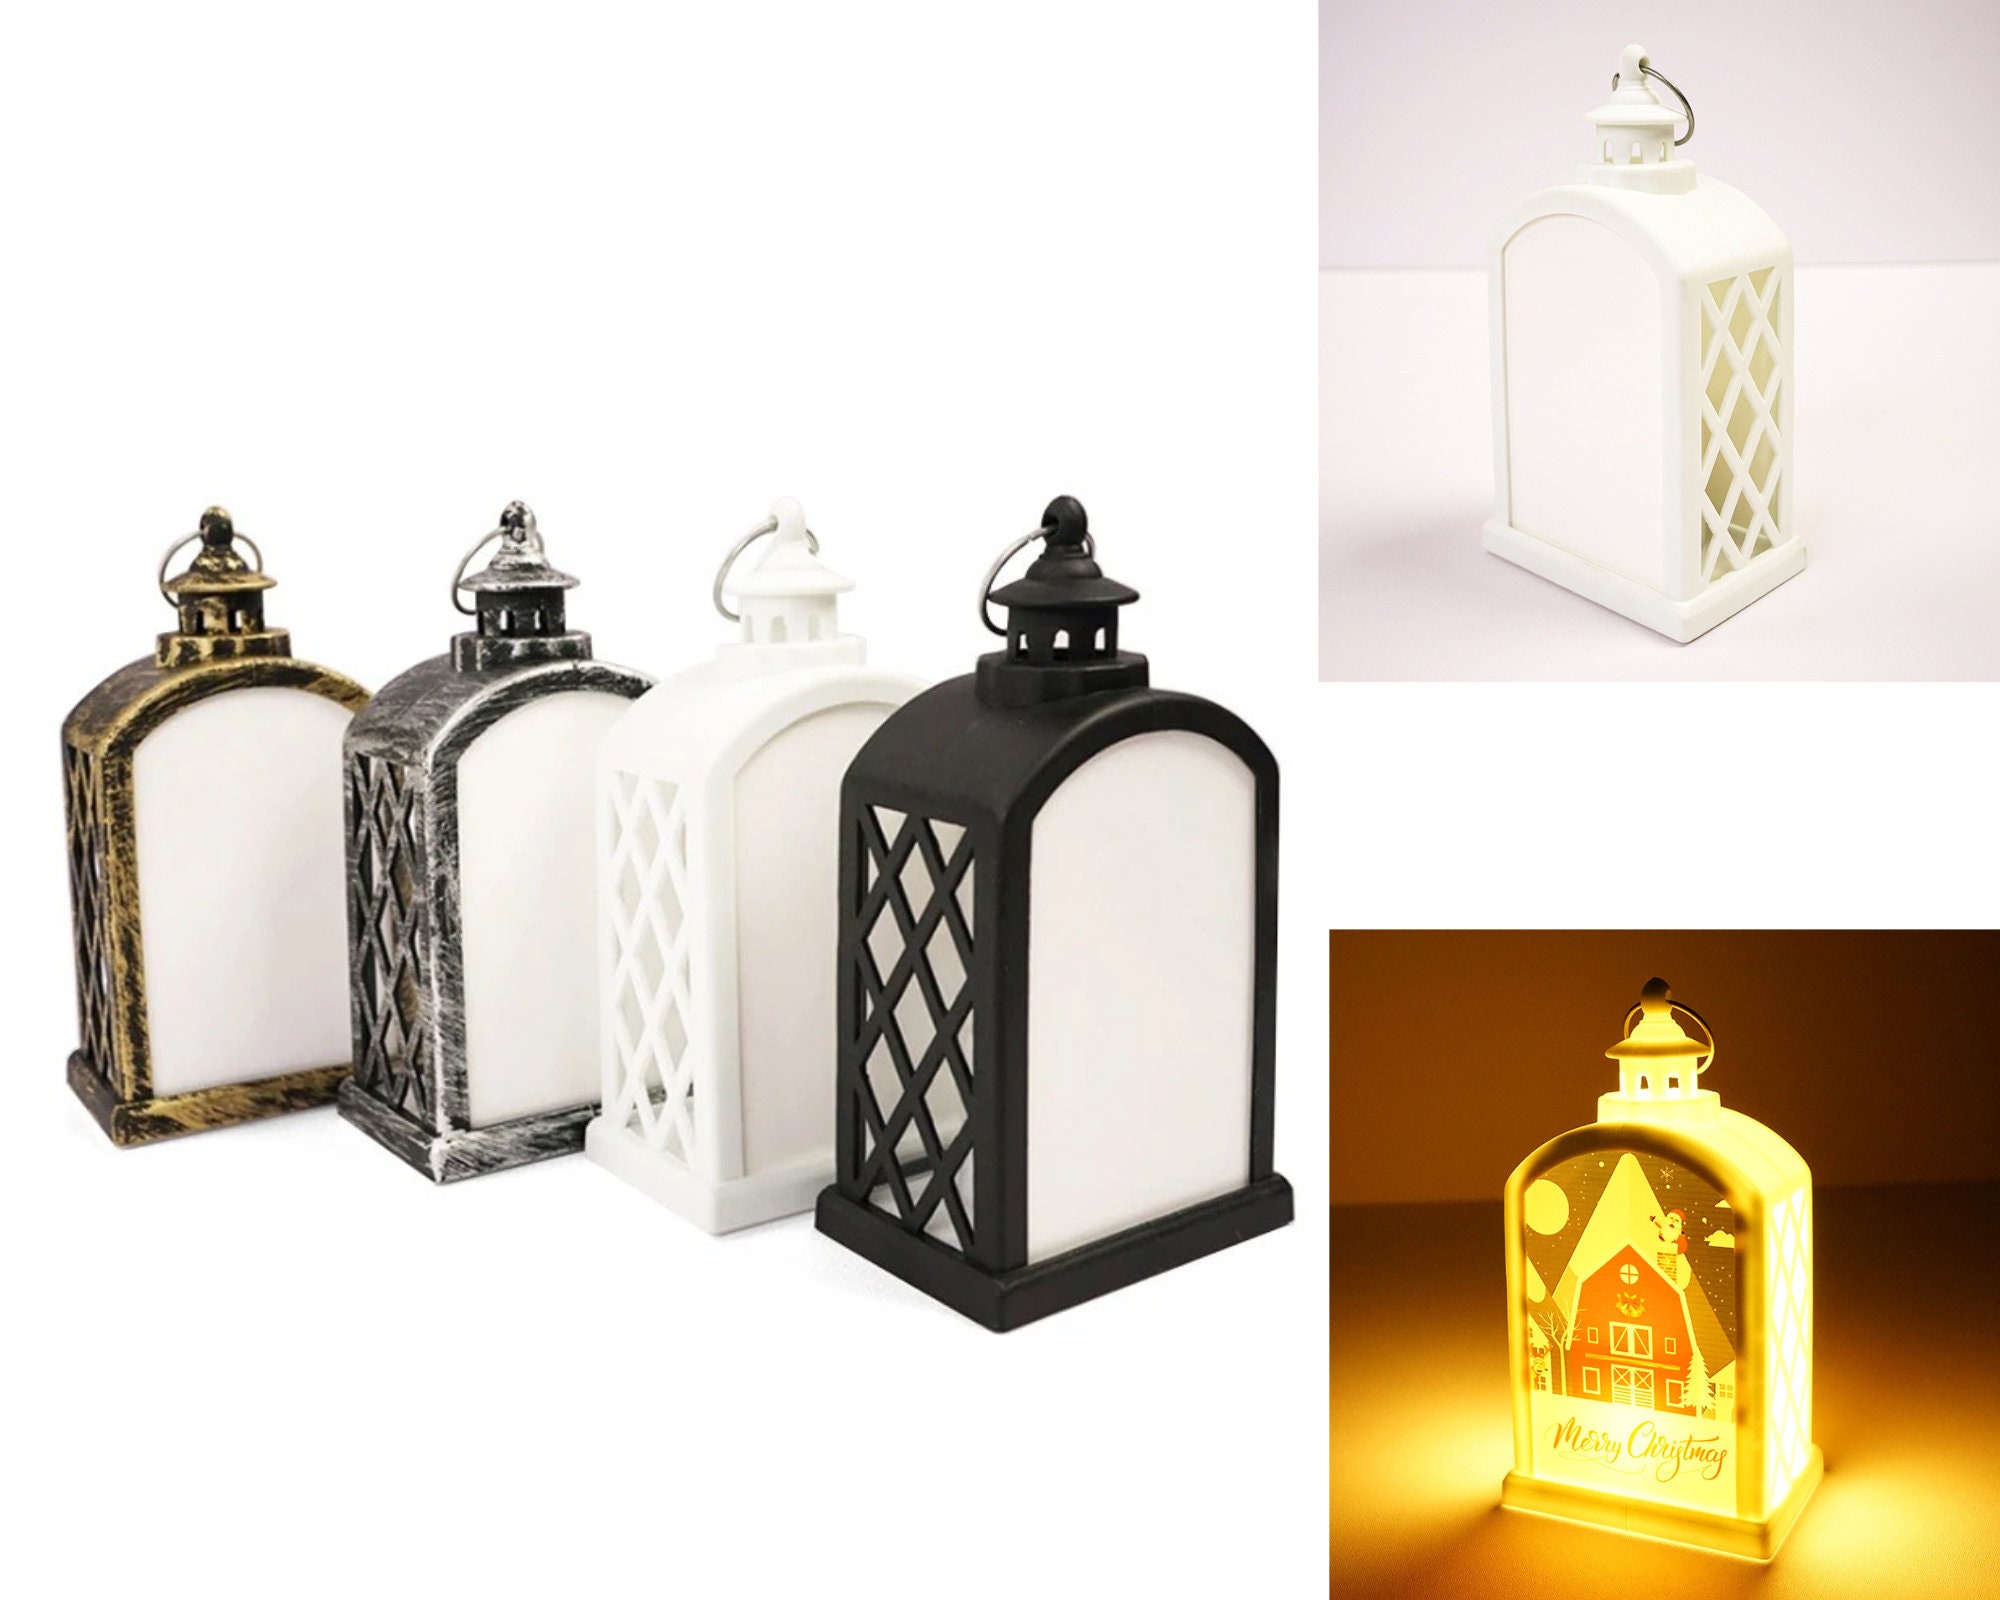 Wholesale Small White Color Glass Lantern - Buy Wholesale Candle